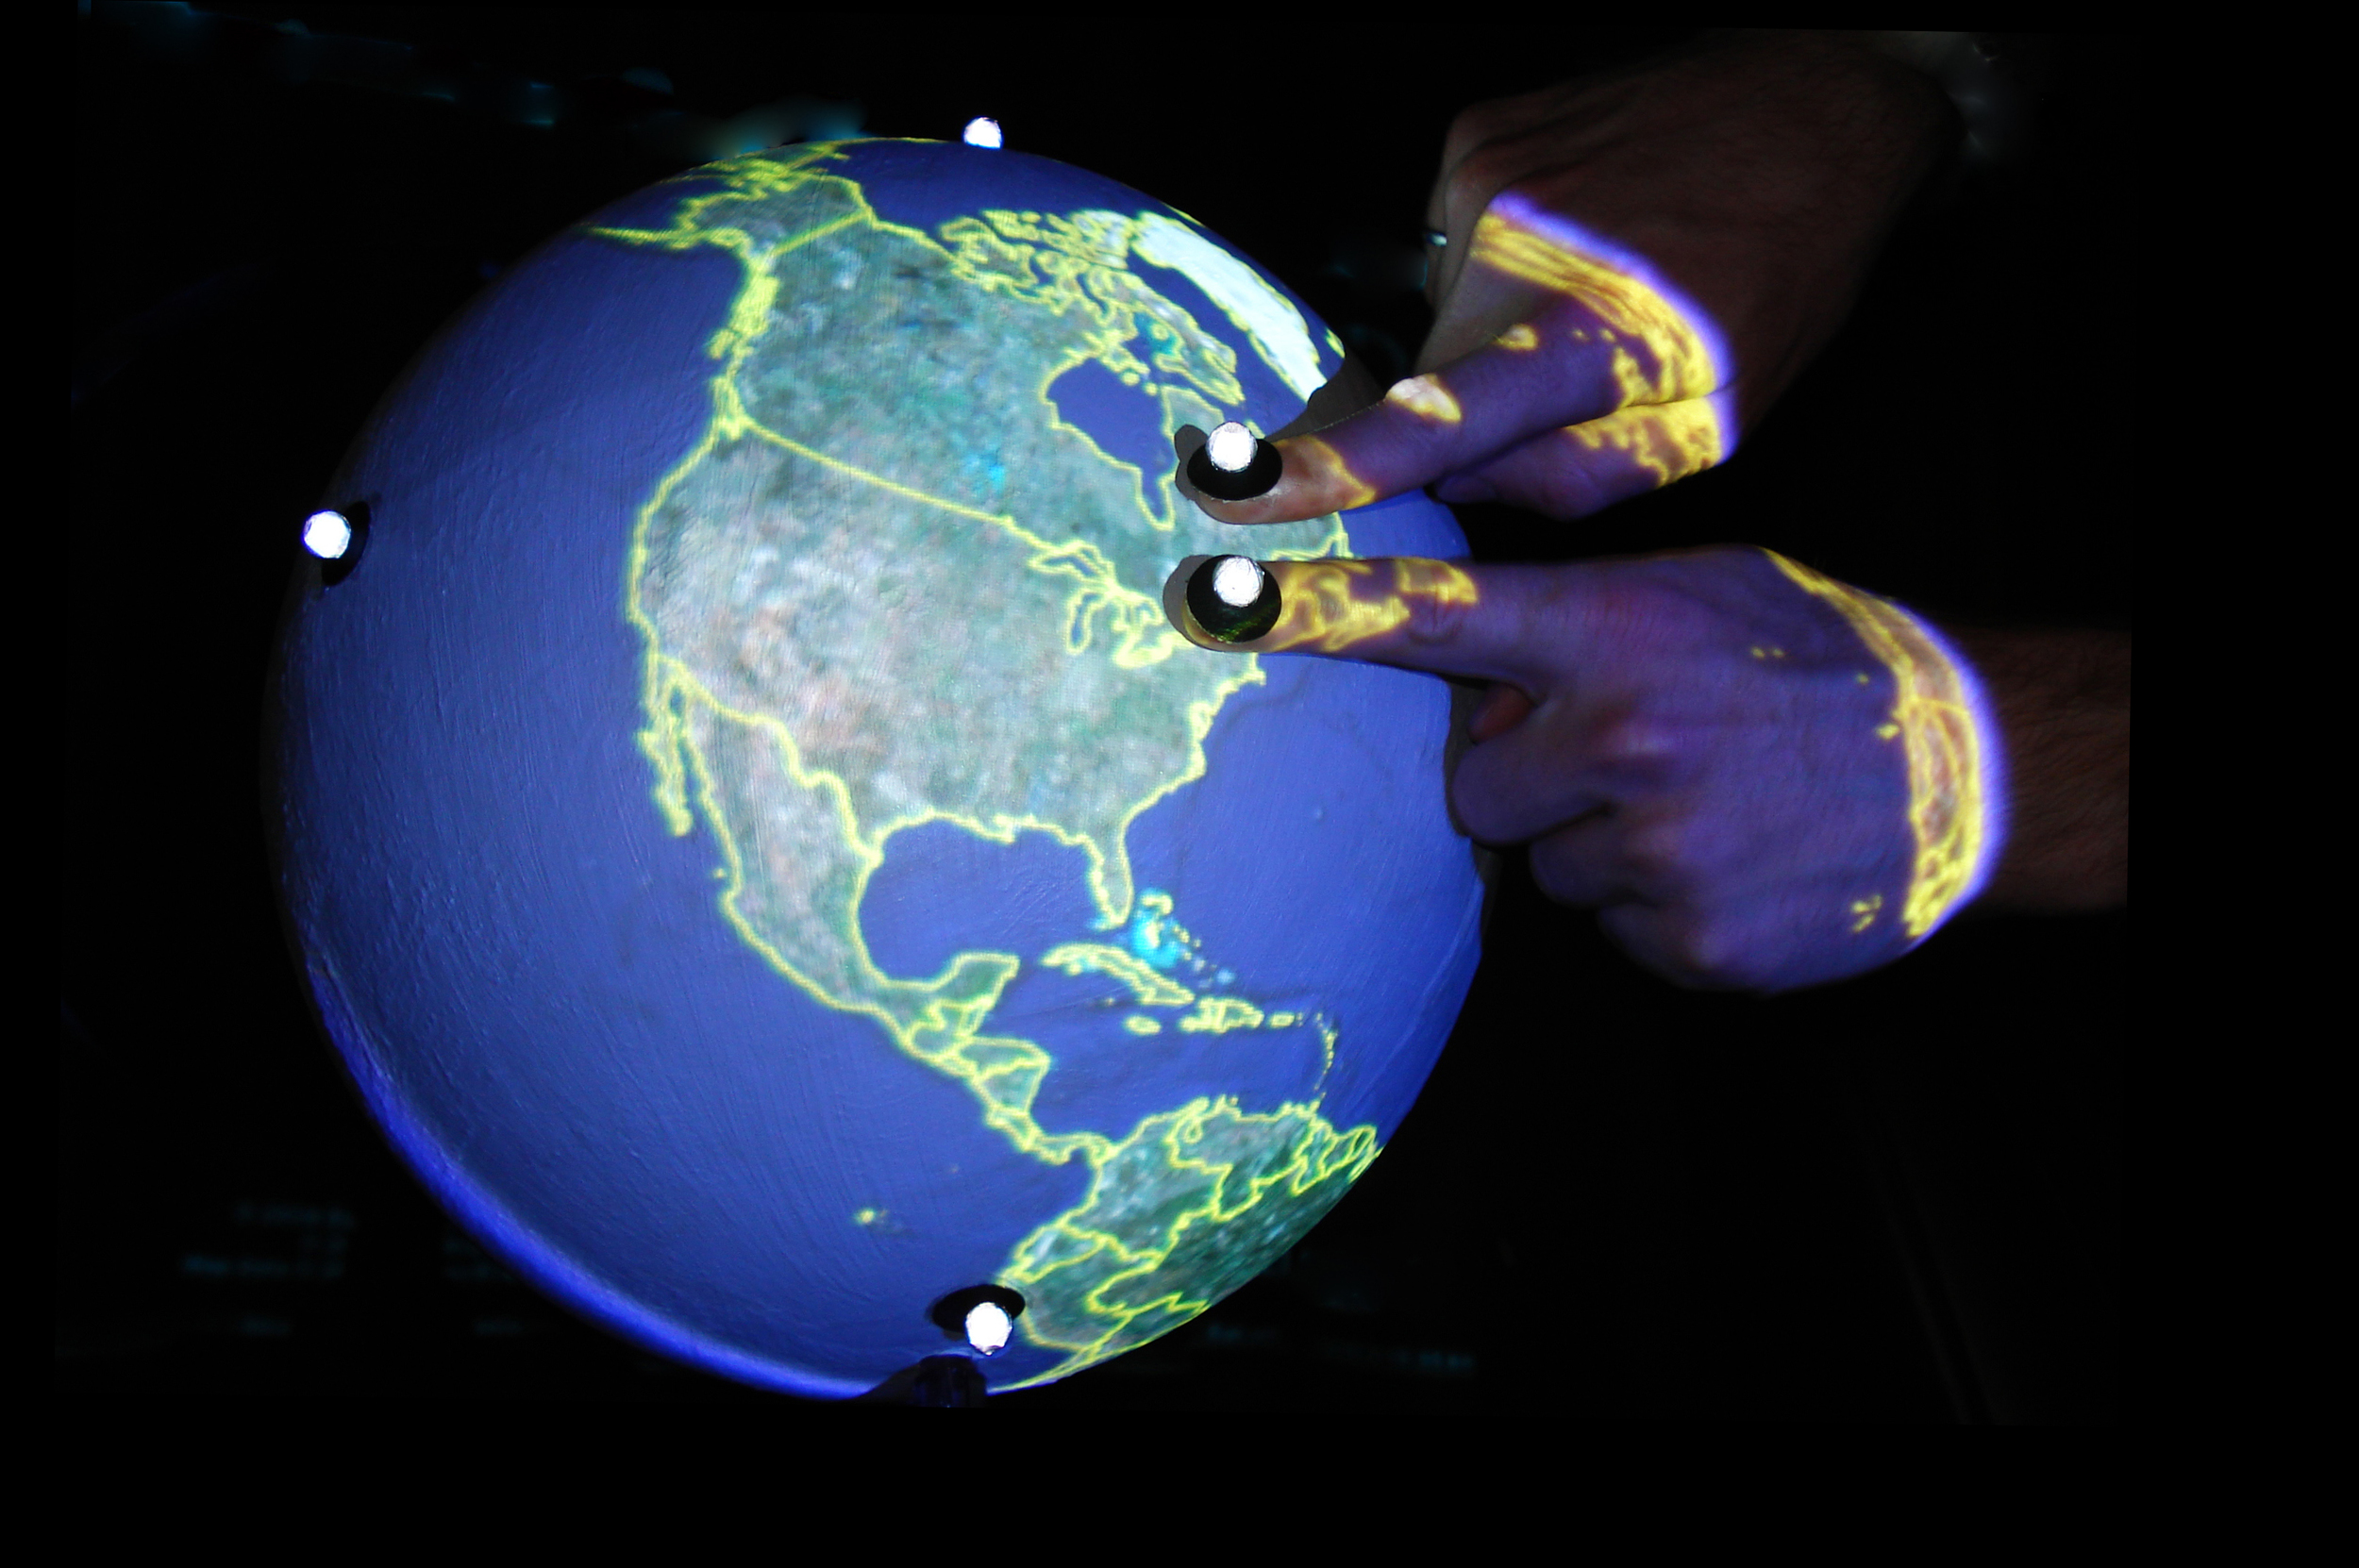 first multitouch sphere (2008): zoom in gesture